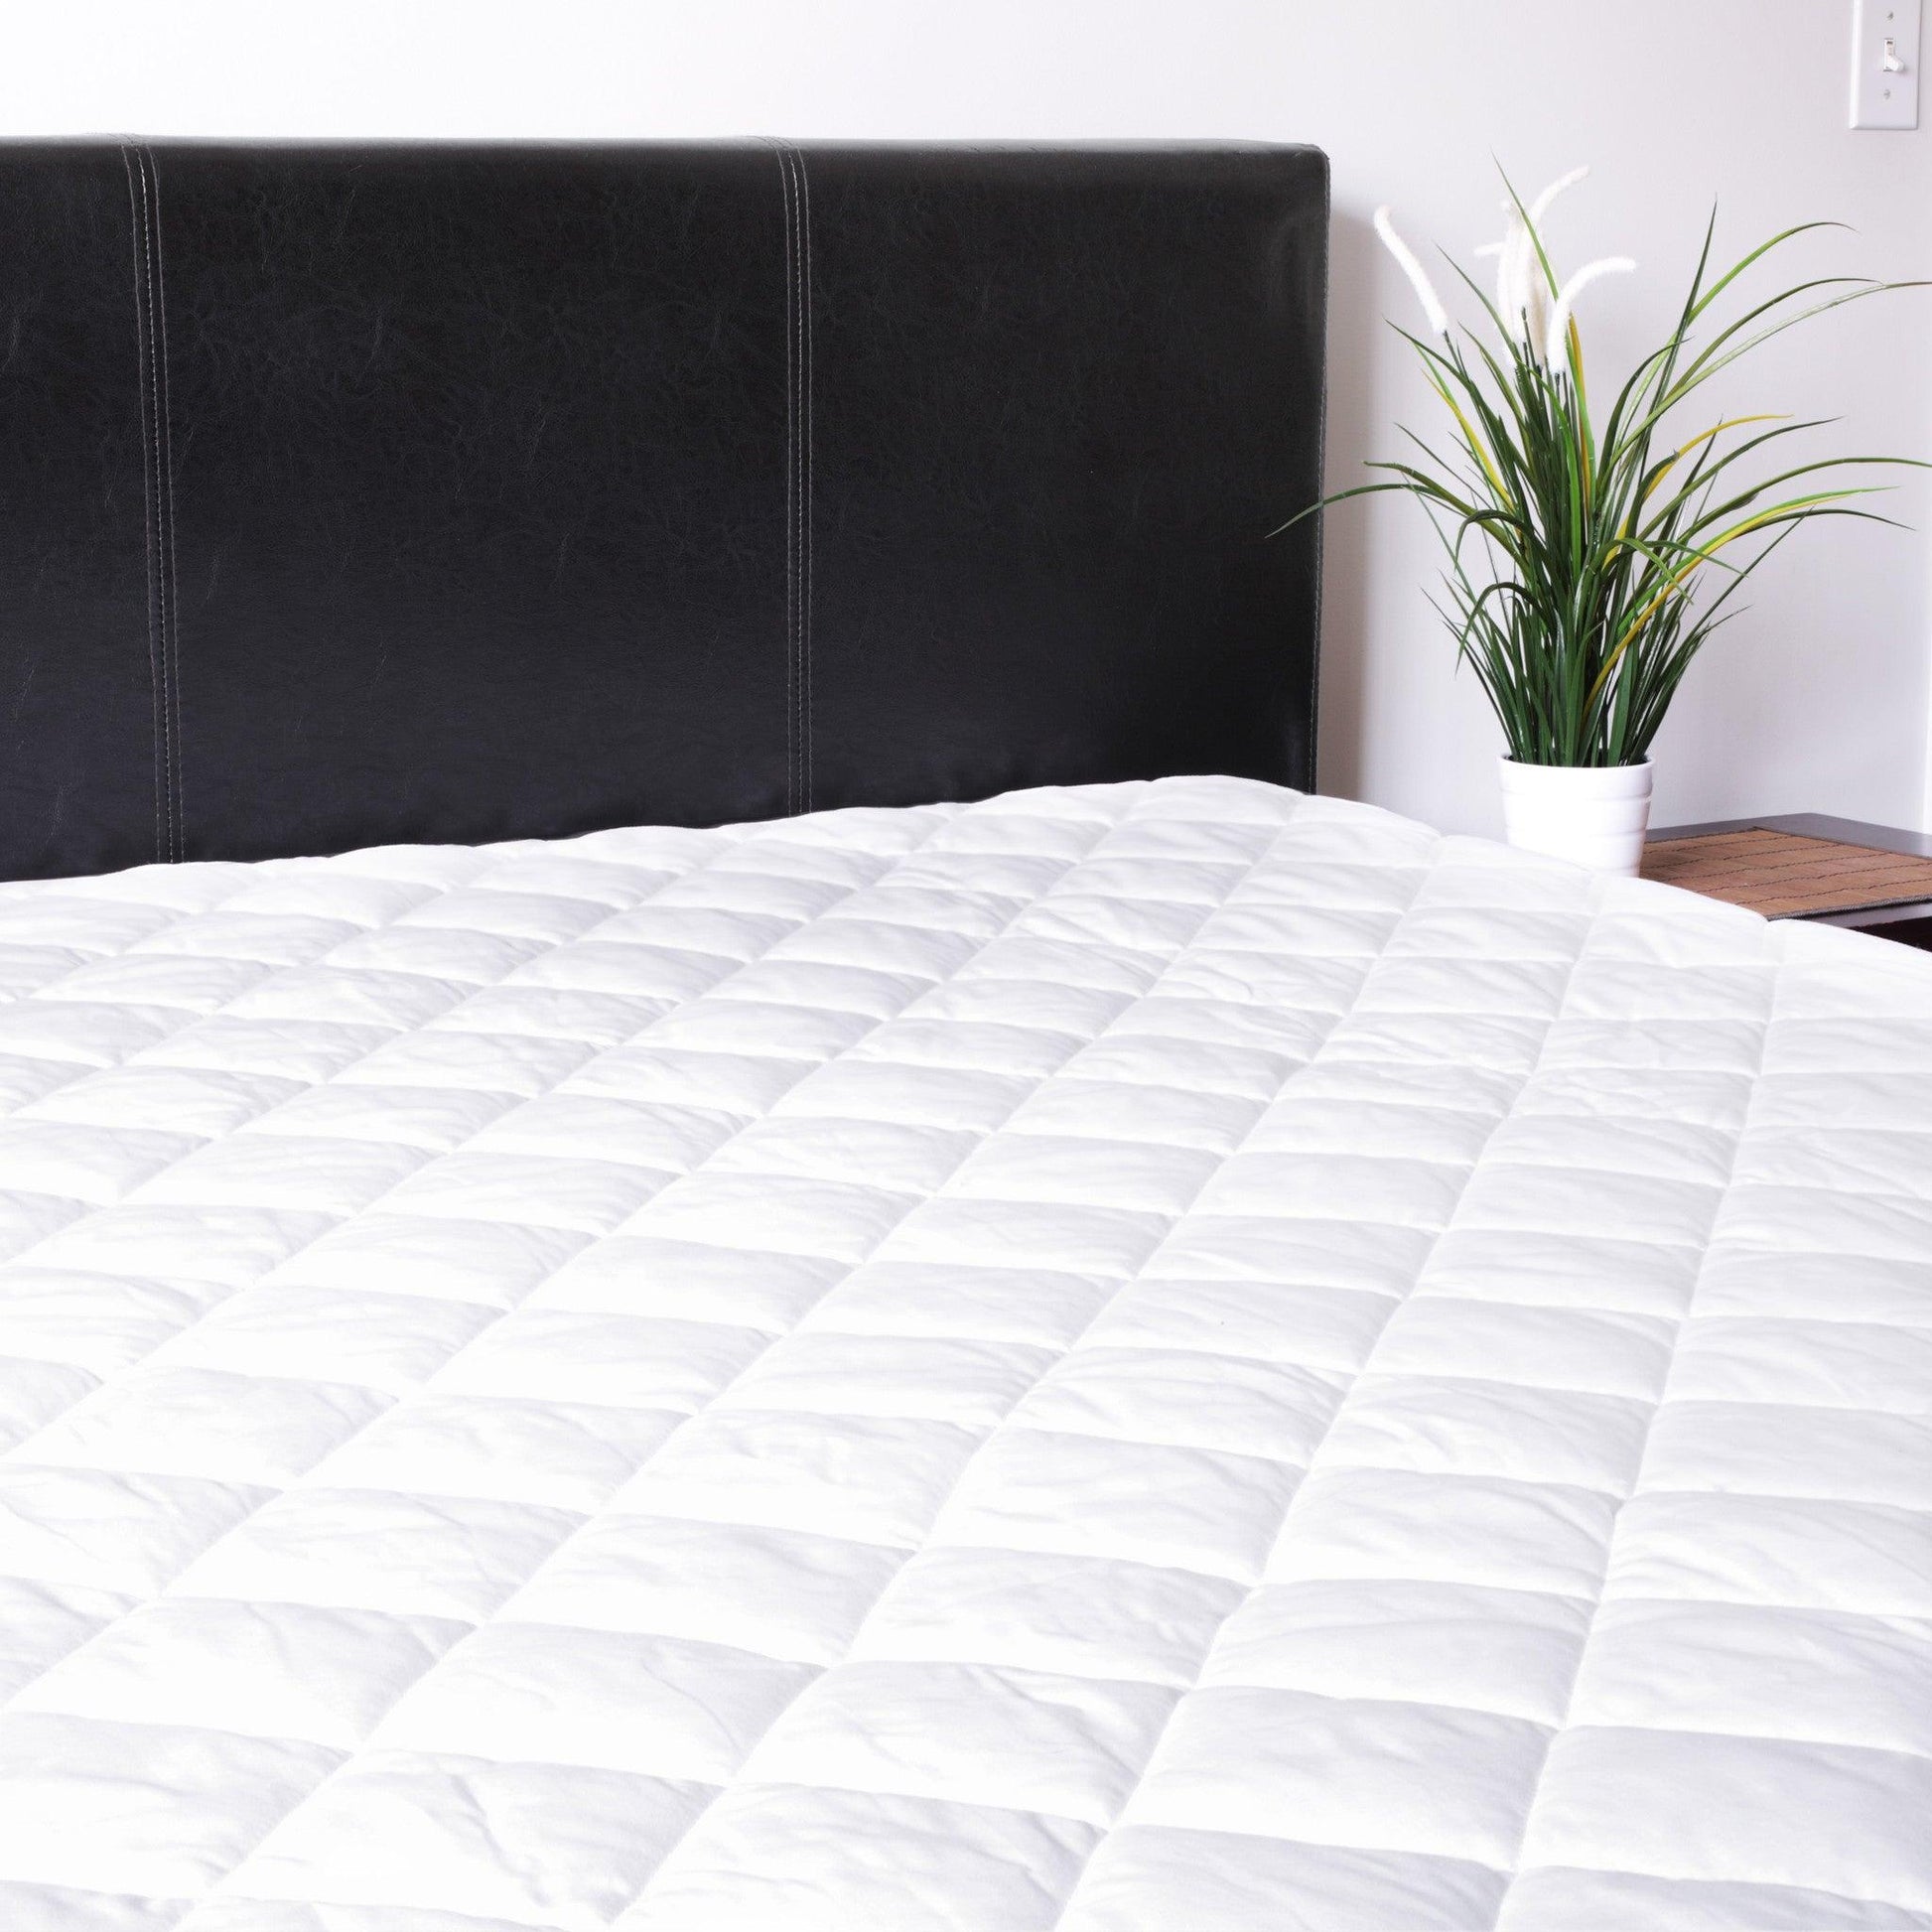 Mattress pillowtop (4 photos) - Photography and Web Design - Los Angeles, US based Shopify Experts Revo Designs